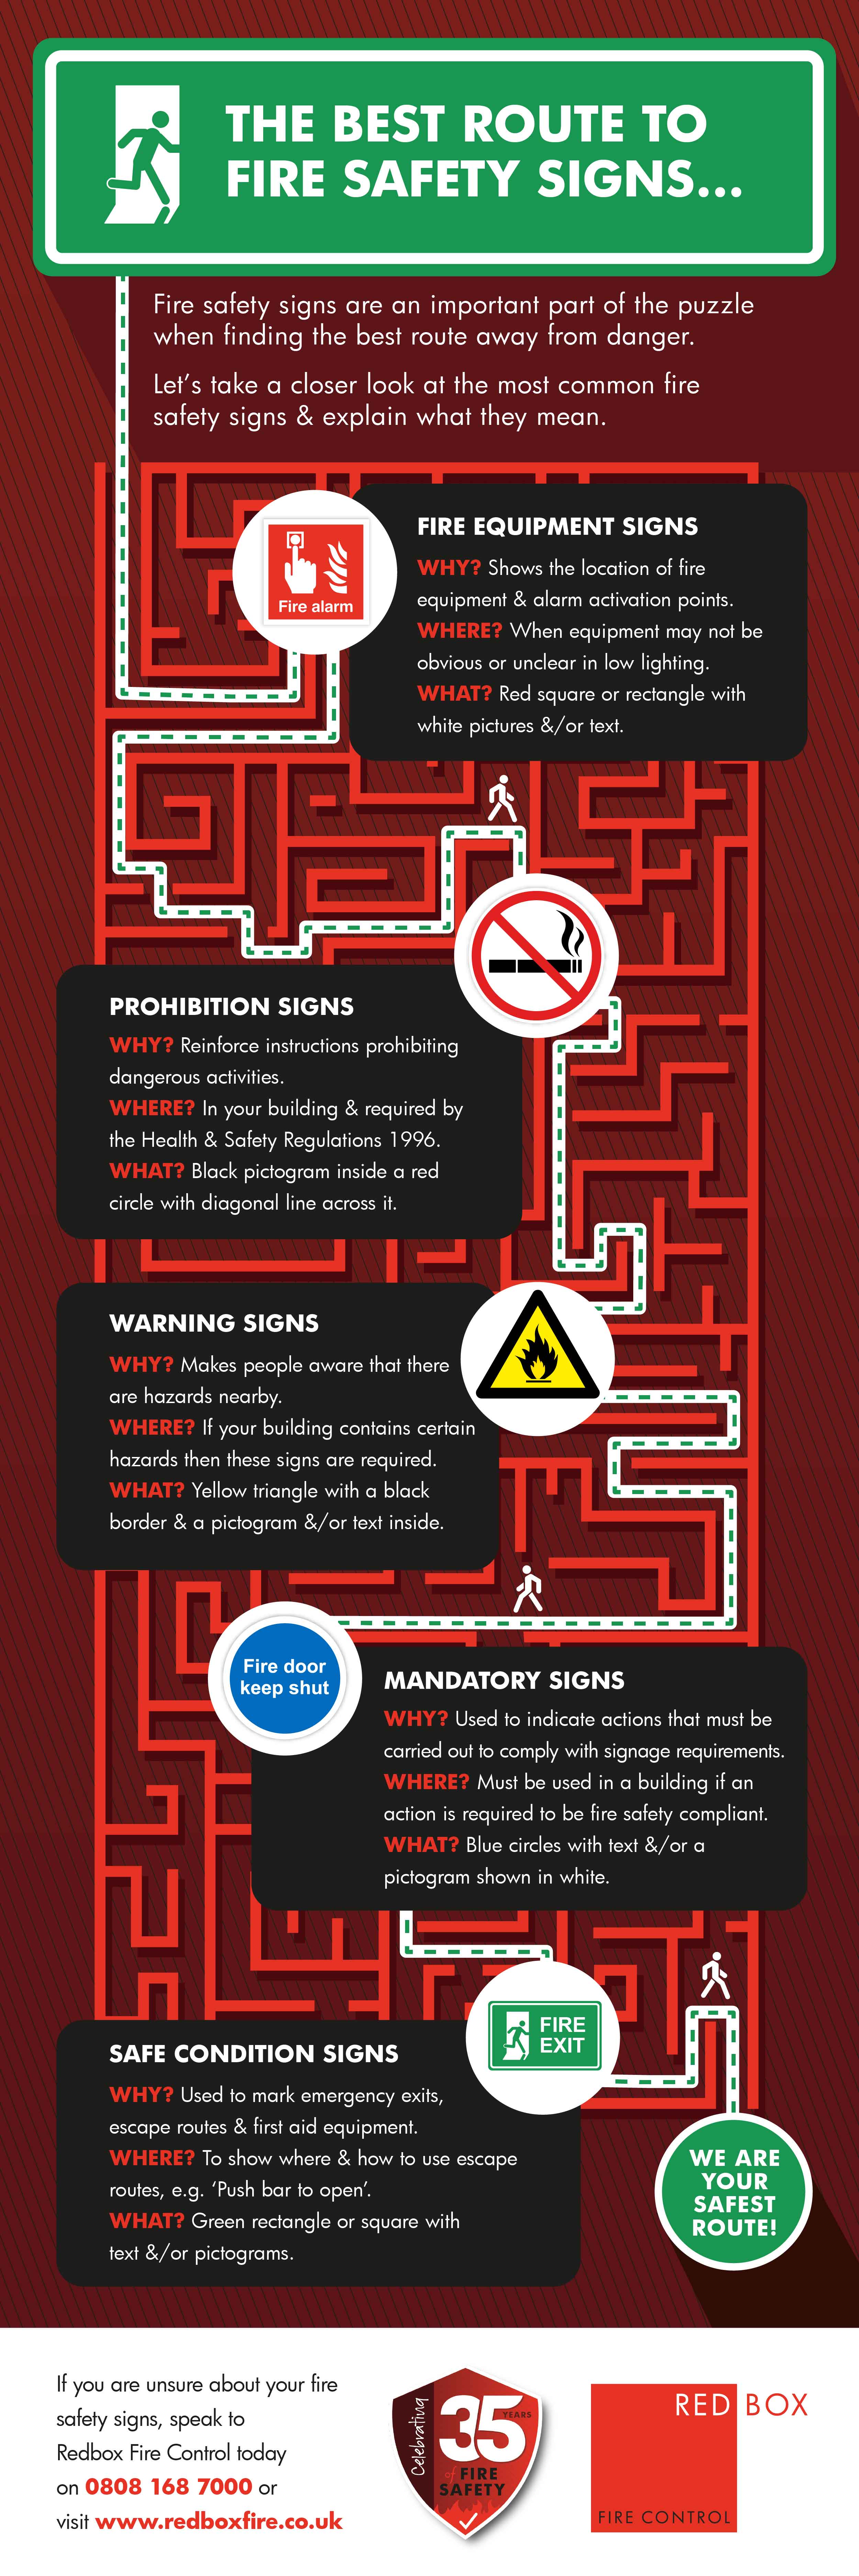 Fire Safety Signage Infographic - Red Box Fire Control